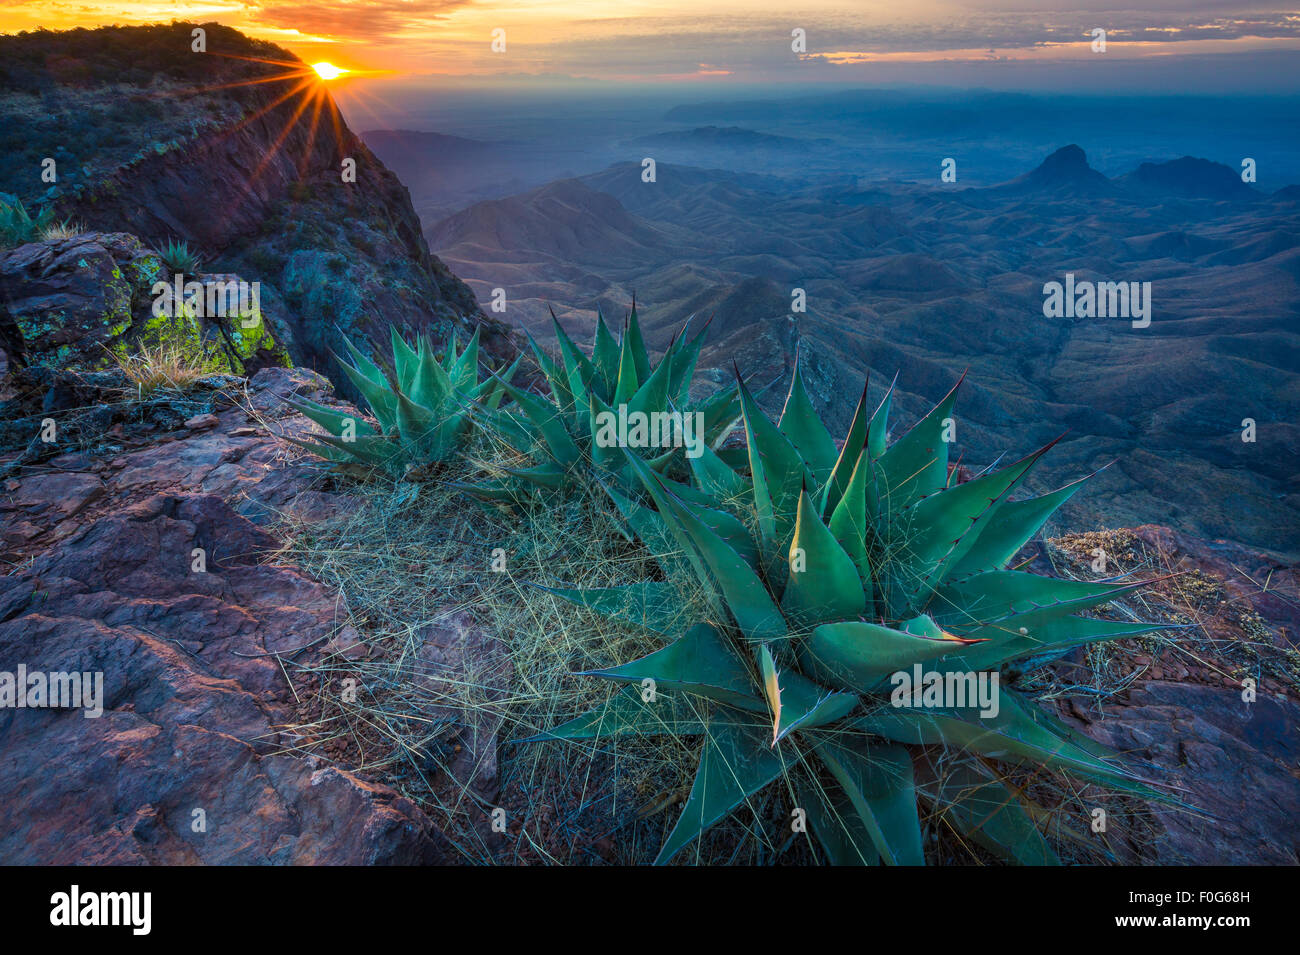 Big Bend National Park in Texas is the largest protected area of Chihuahuan Desert the United States. Stock Photo